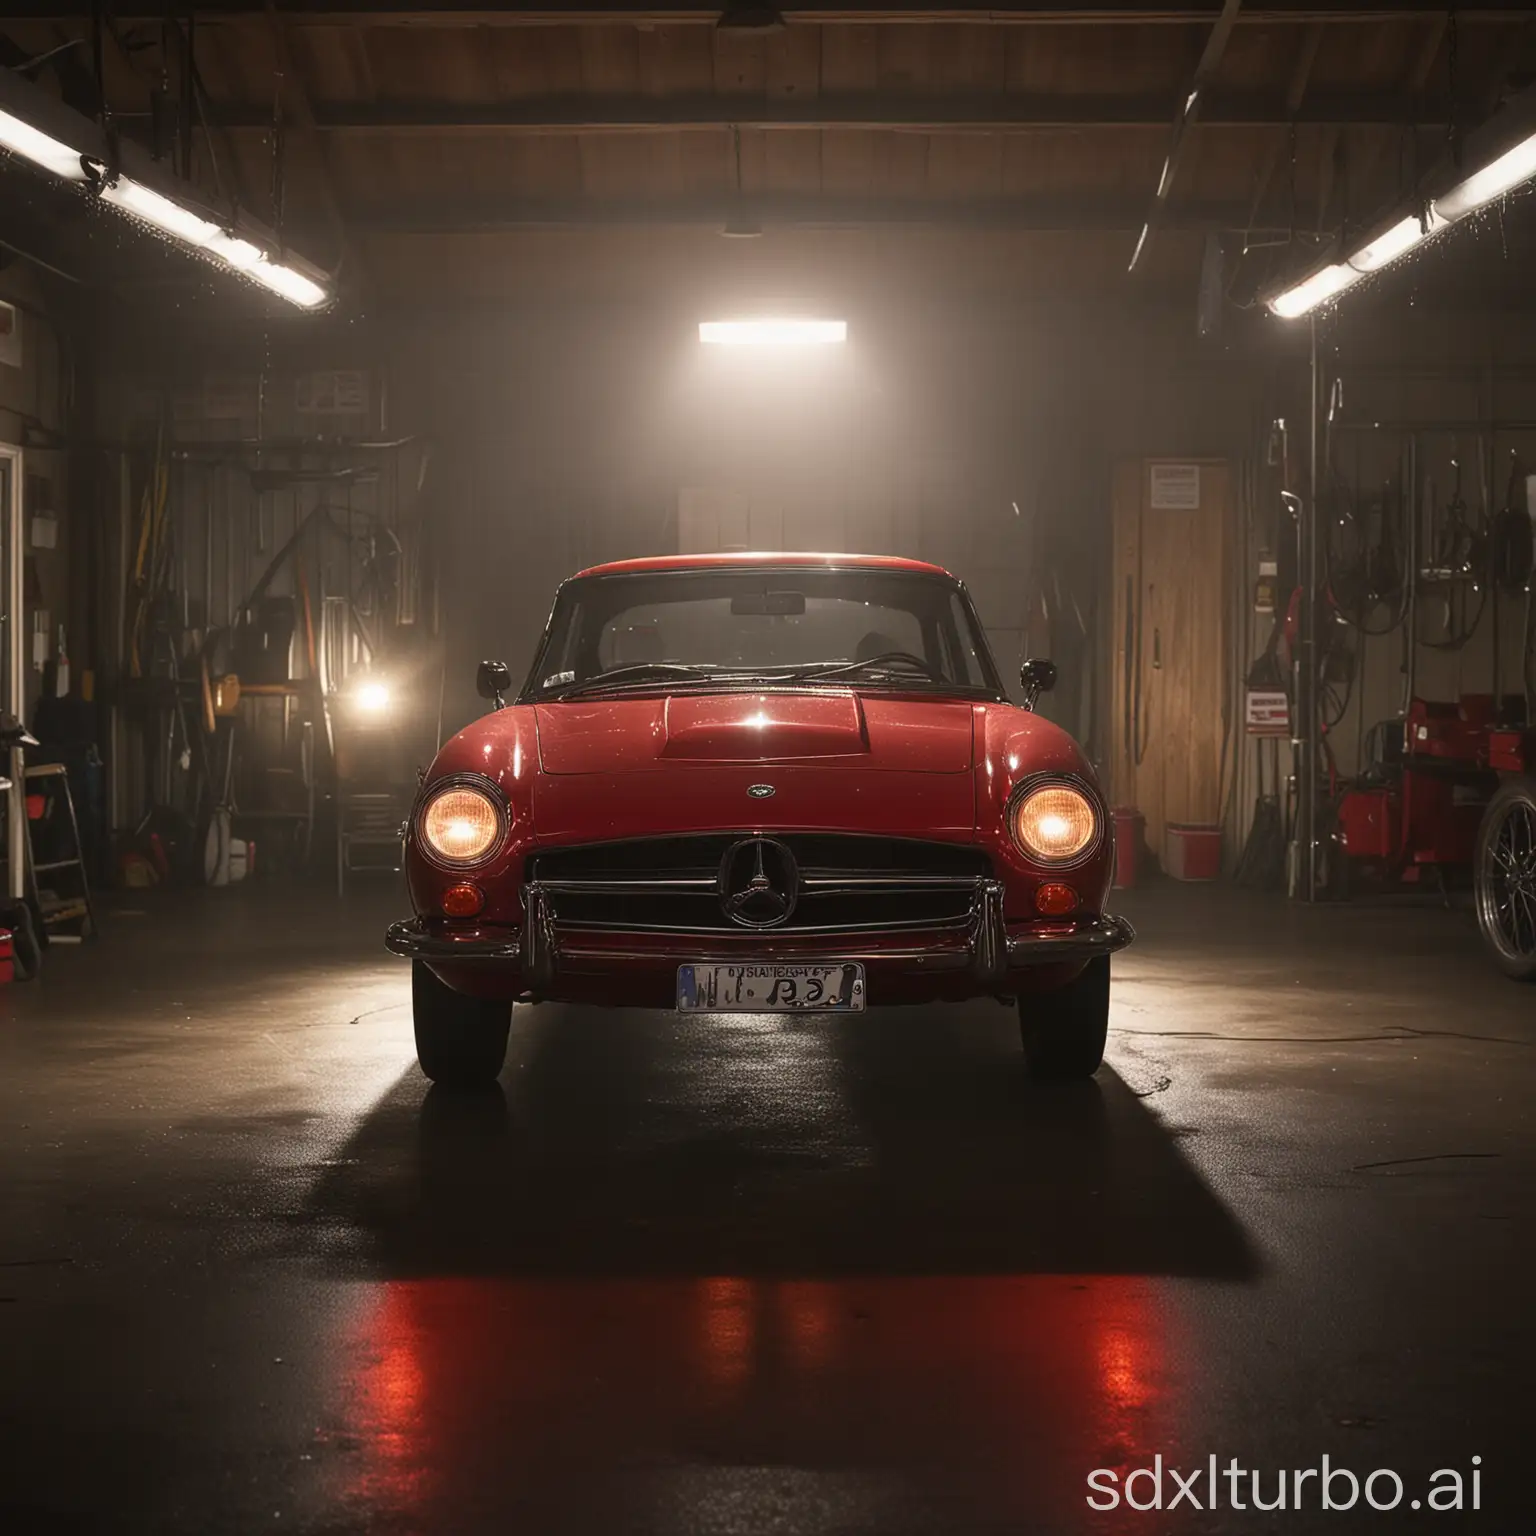 Shiny-Red-Car-Parked-in-Dimly-Lit-Garage-Classic-Automotive-Elegance-Captured-in-Illuminated-Scene